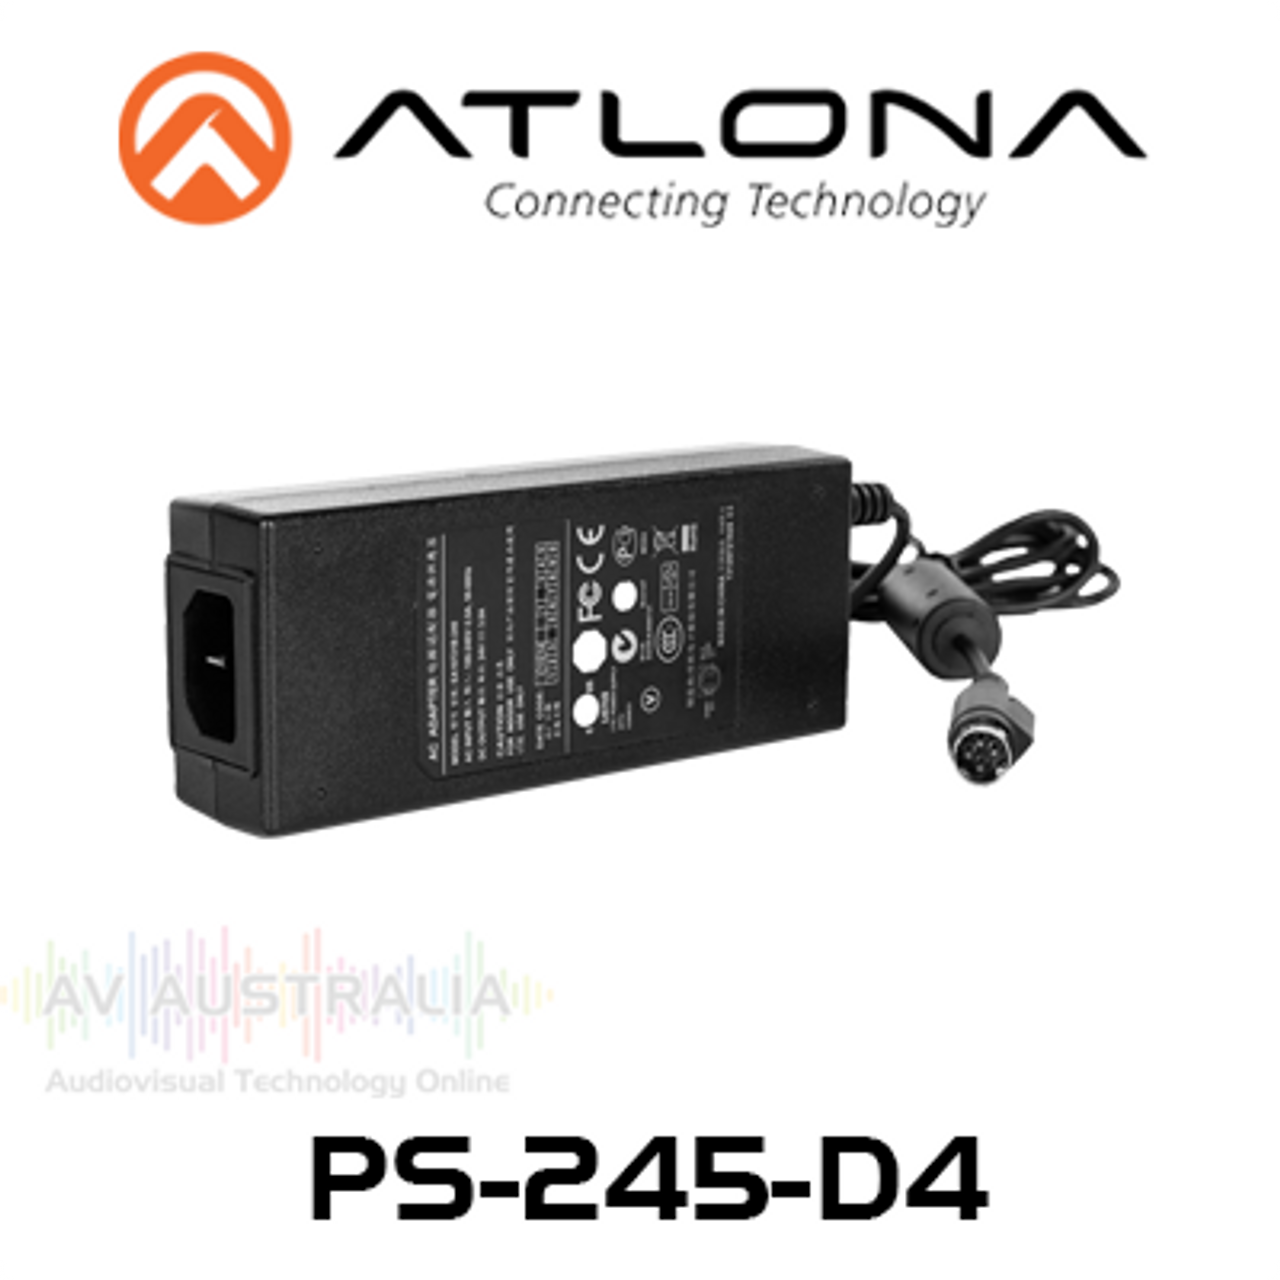 Atlona 24 Volt 5 Amp Power Supply with DIN Connector